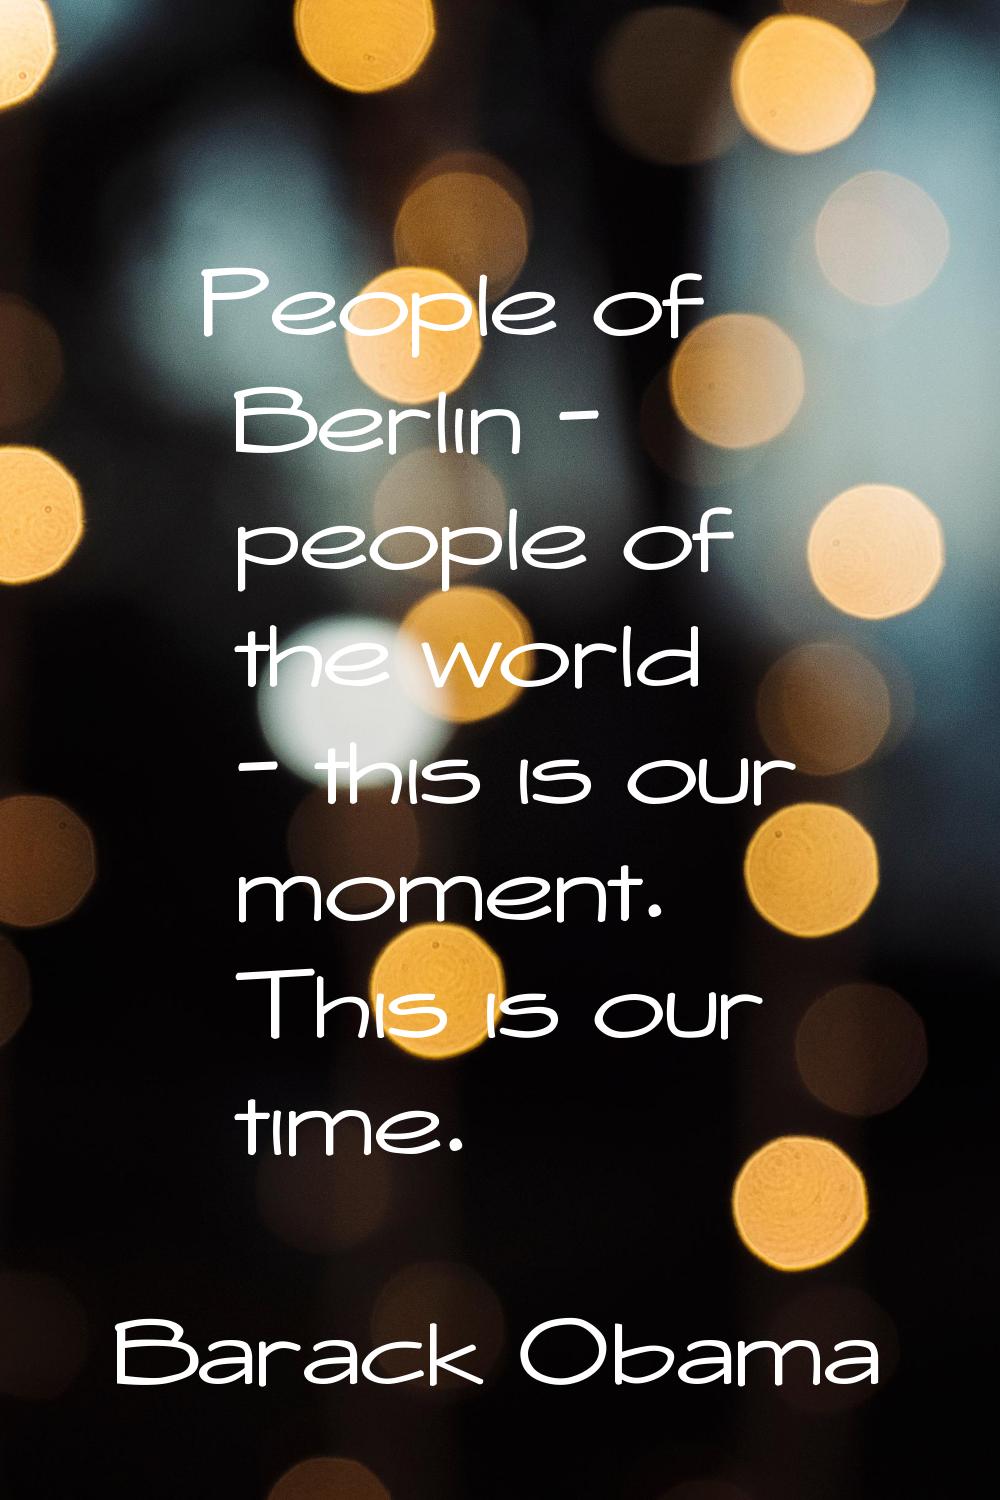 People of Berlin - people of the world - this is our moment. This is our time.